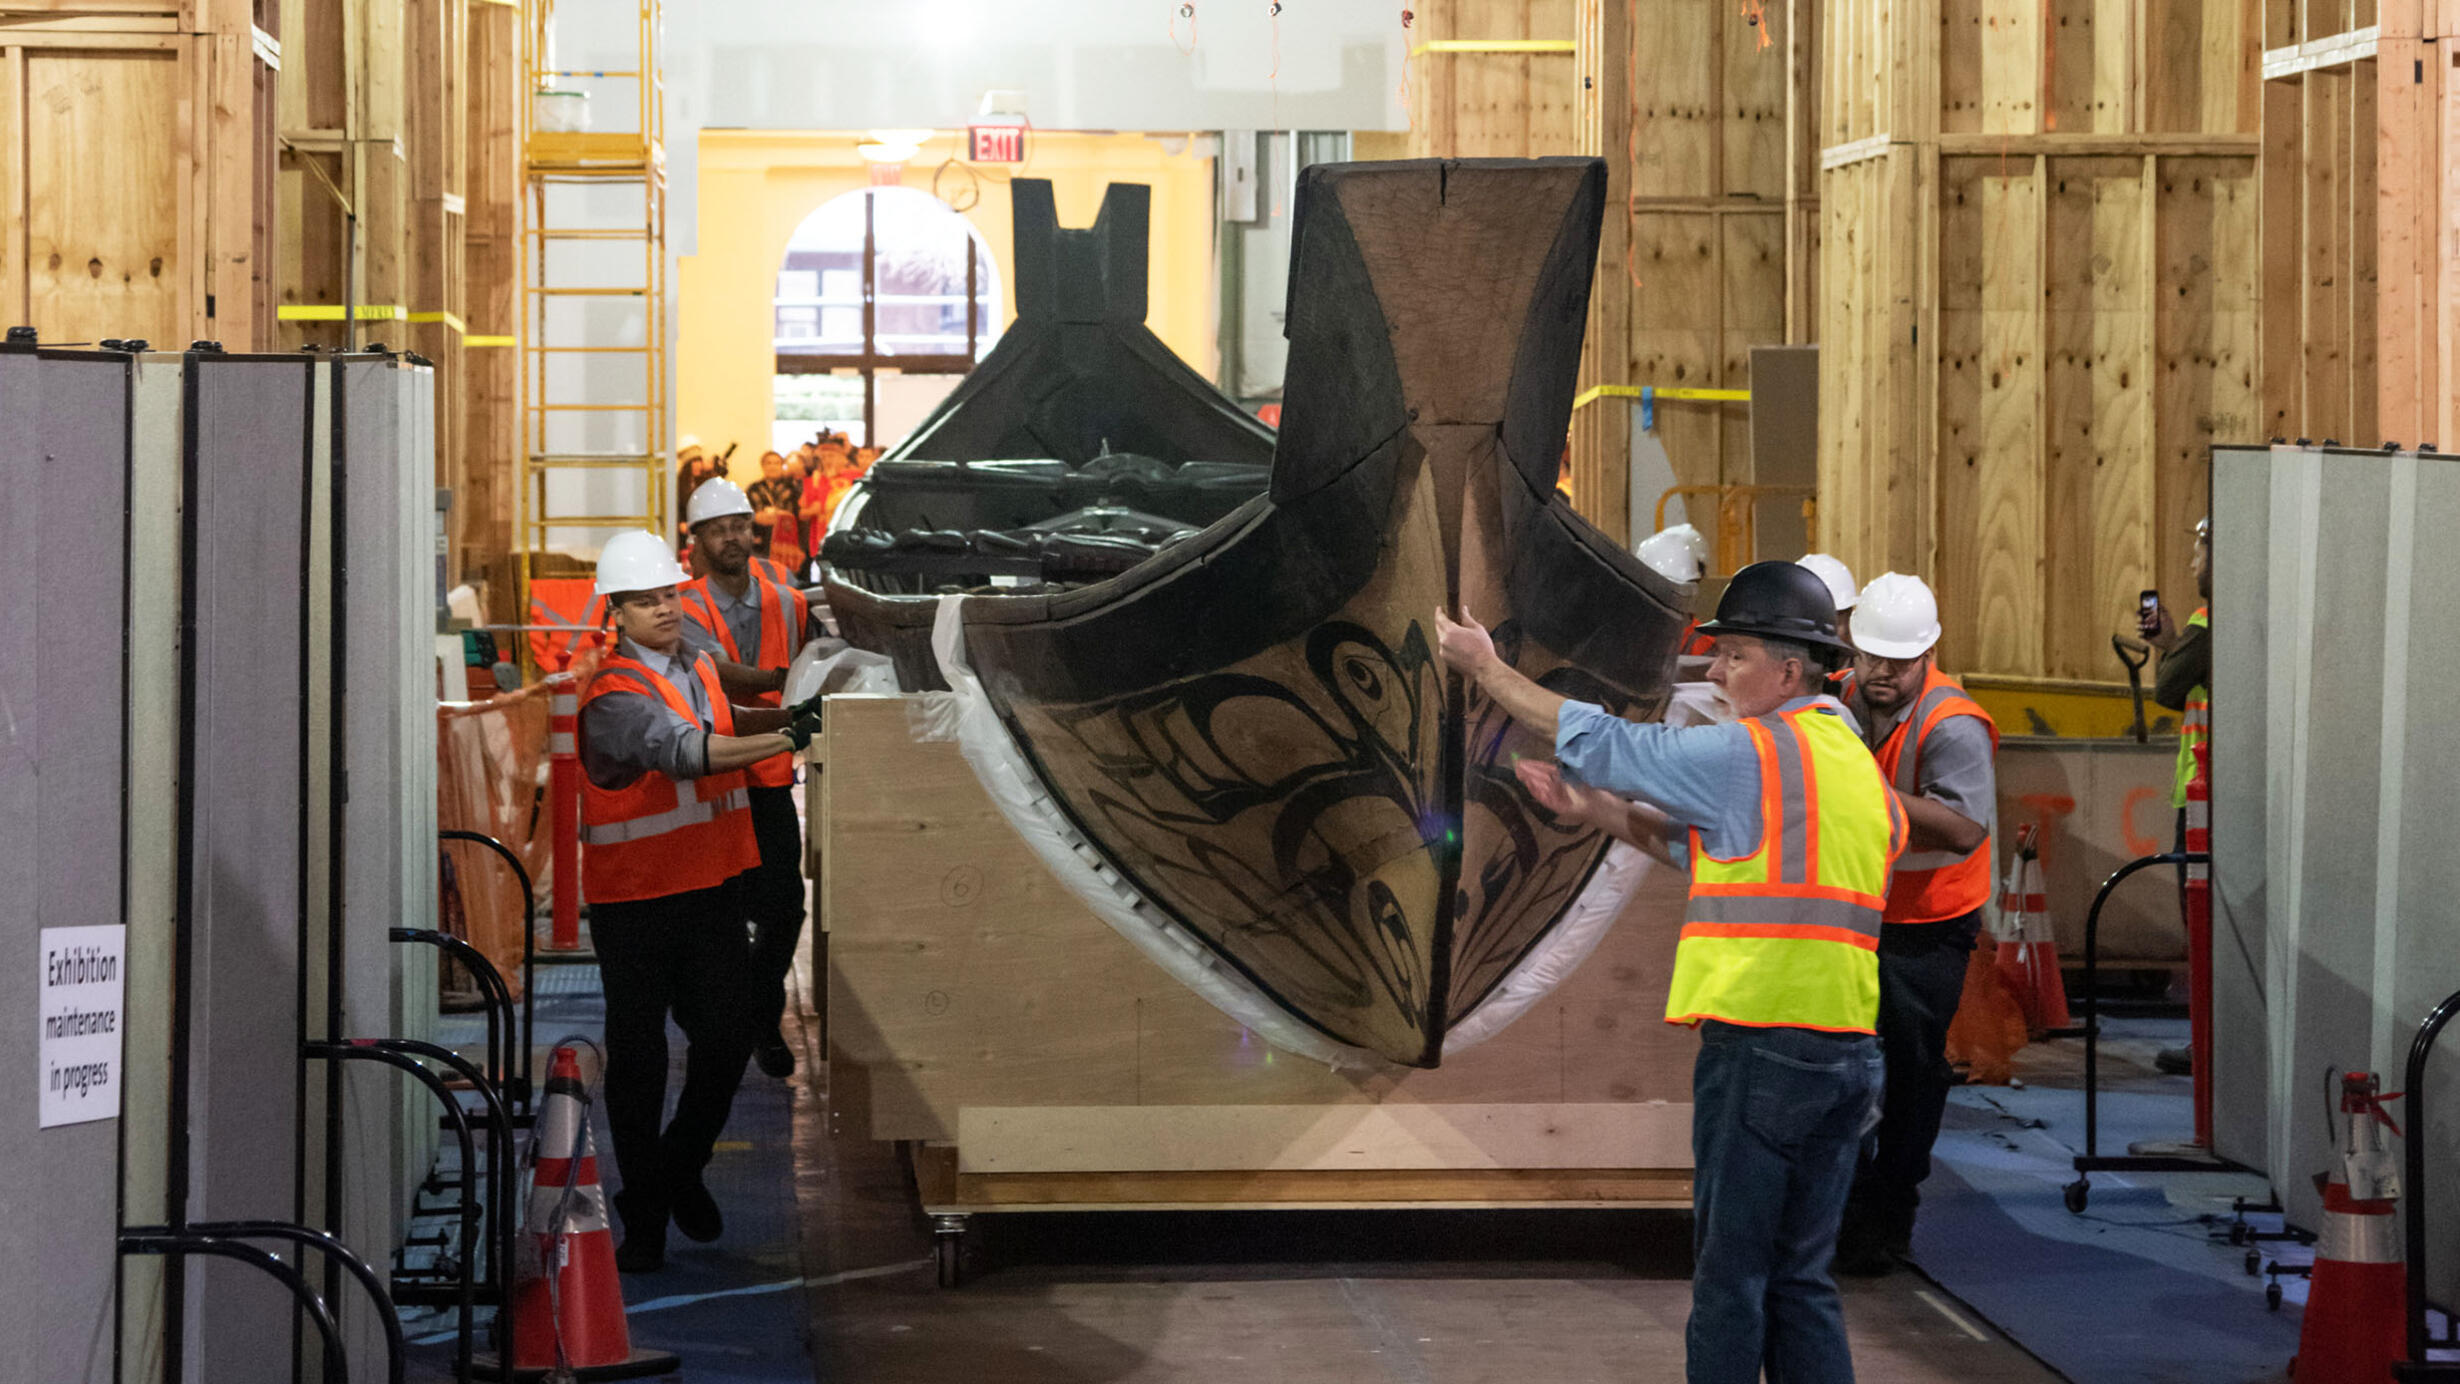 Workmen move the canoe into place in the Northwest Coast Hall.